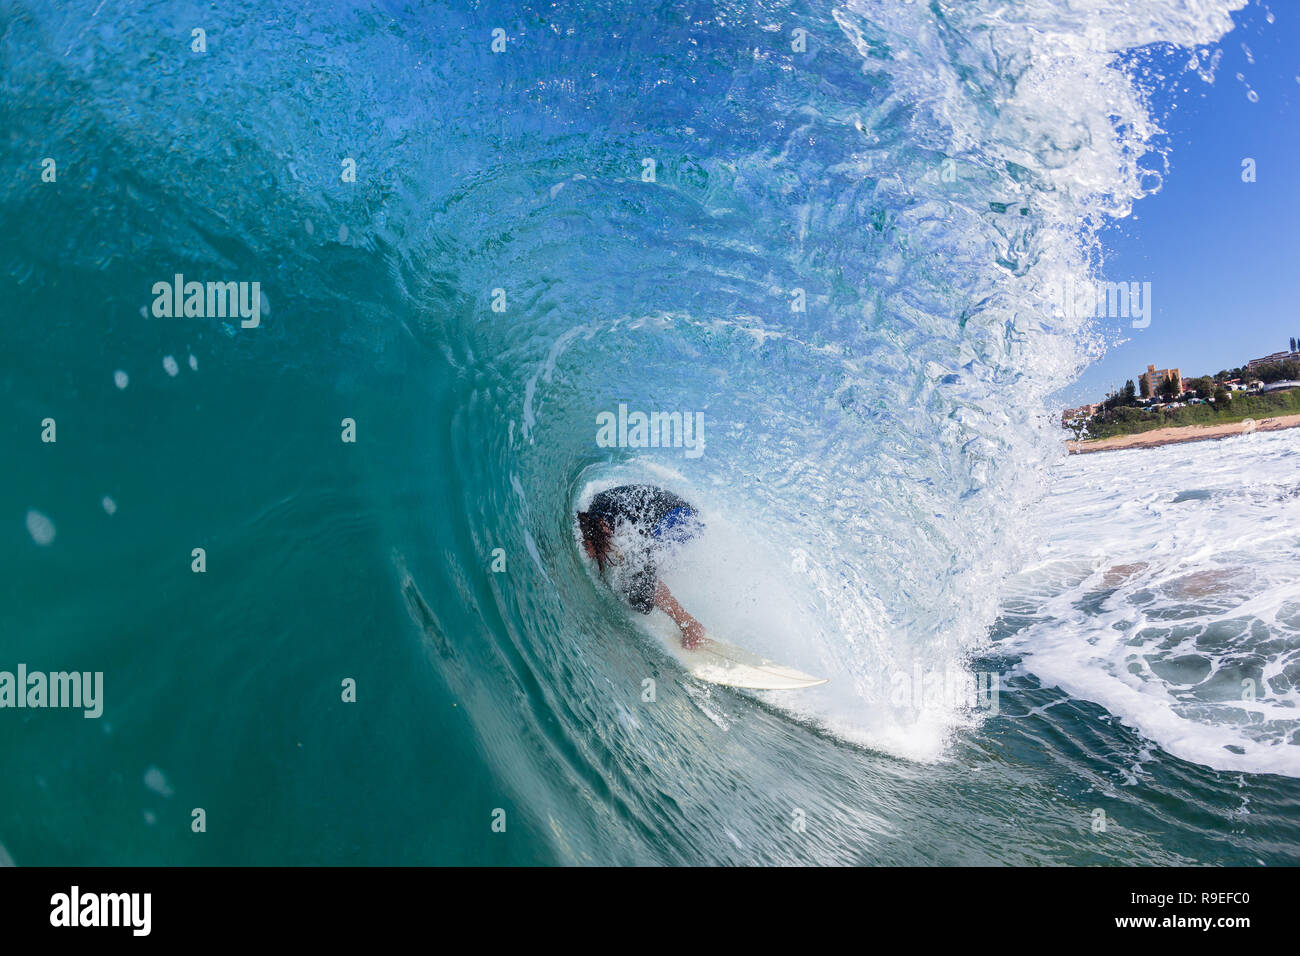 Surfer surfing riding  inside hollow ocean wave tube loosing balance crashing falling wipe-out in progress swimming water action photo. Stock Photo